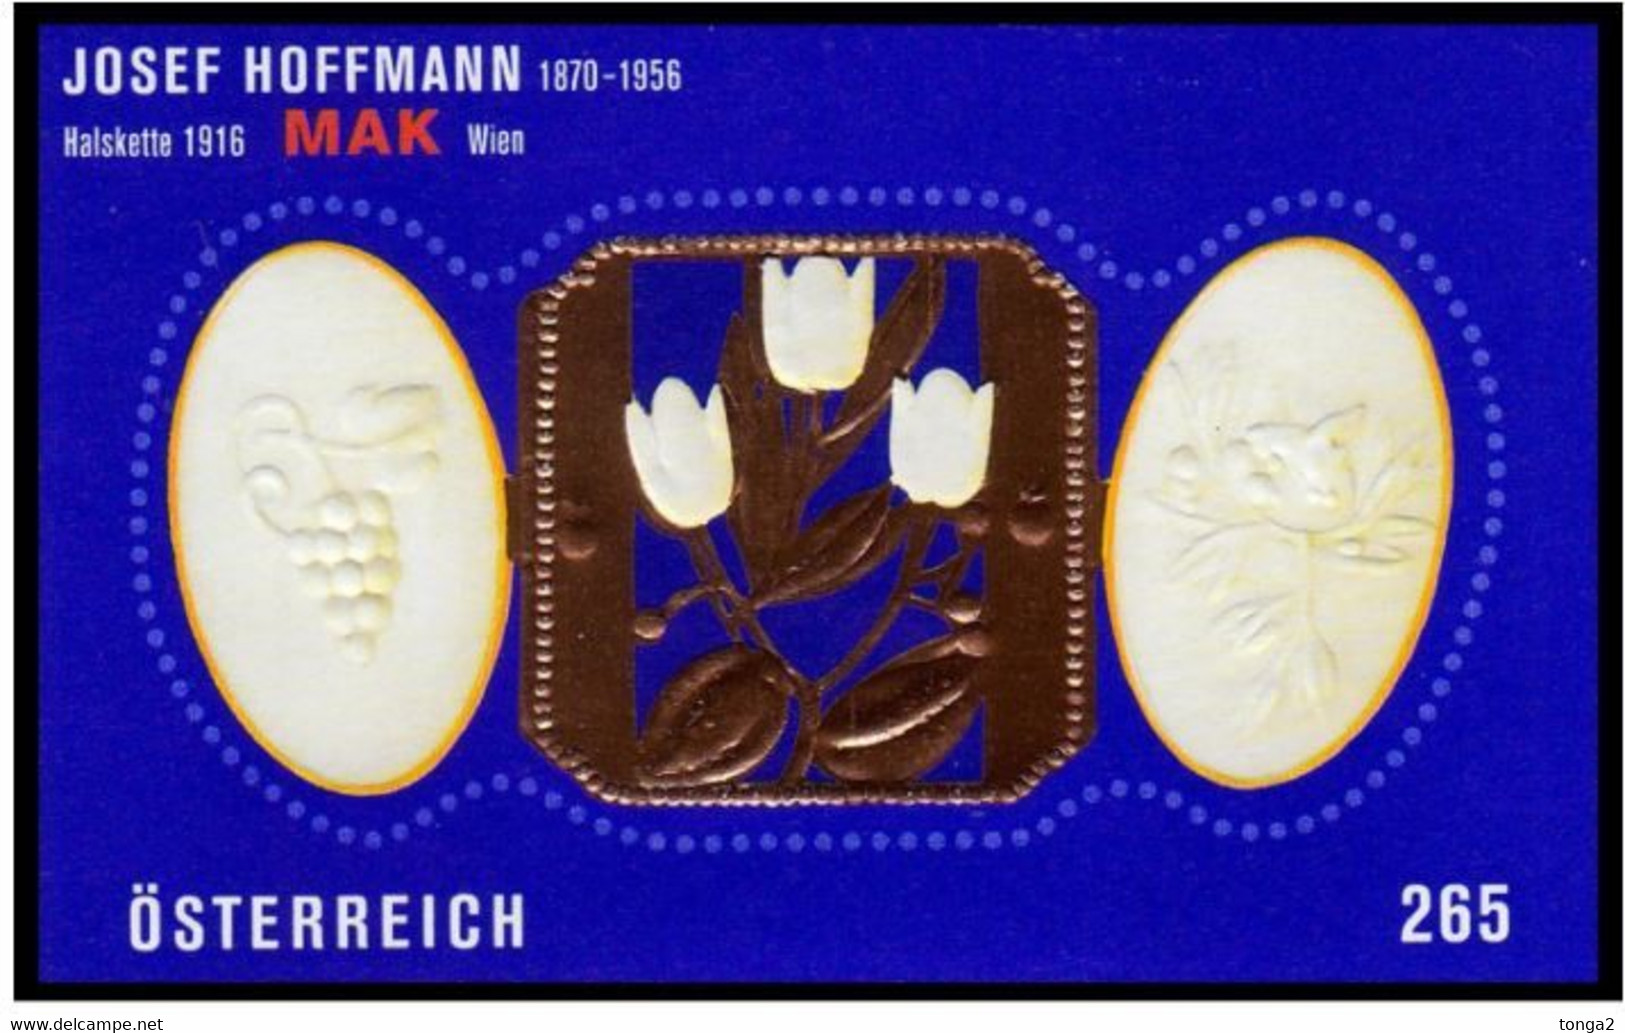 Austria 2007 Hoffmann Stamp With 22 Carat Gold Affixed - Unusual - Hologramme